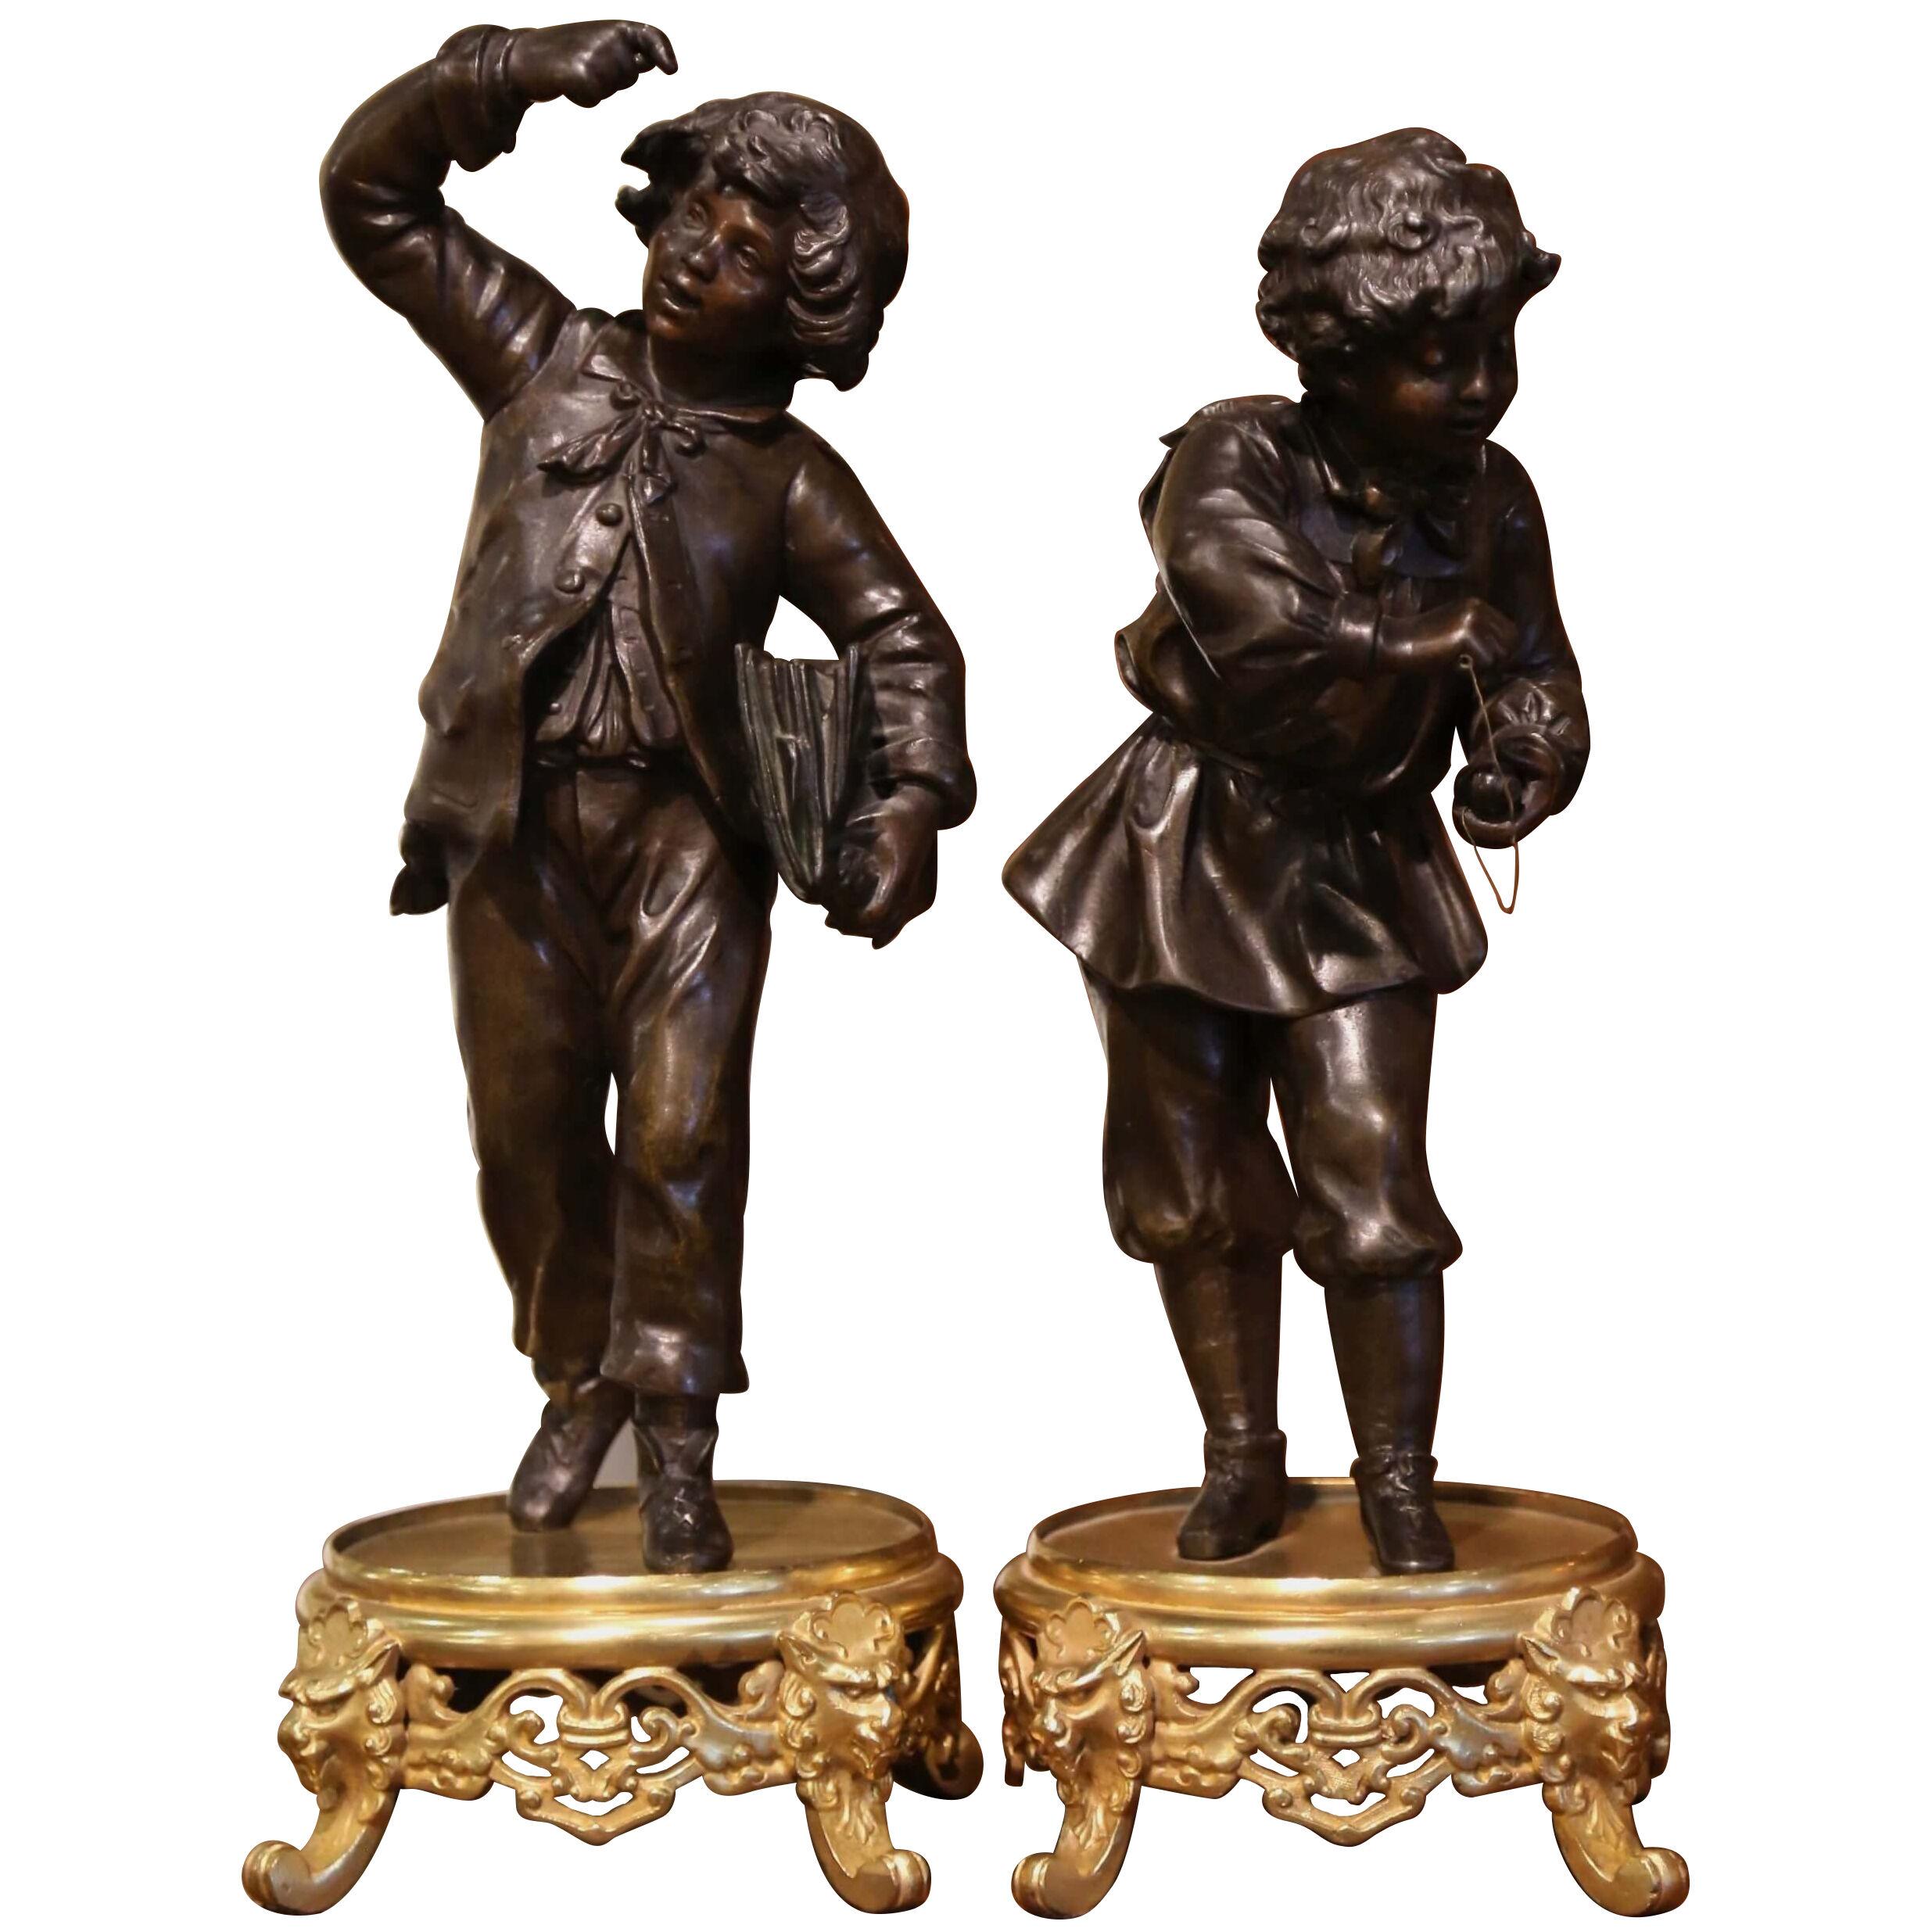 Pair of 19th Century French Spelter and Bronze Boy Figurative Sculptures